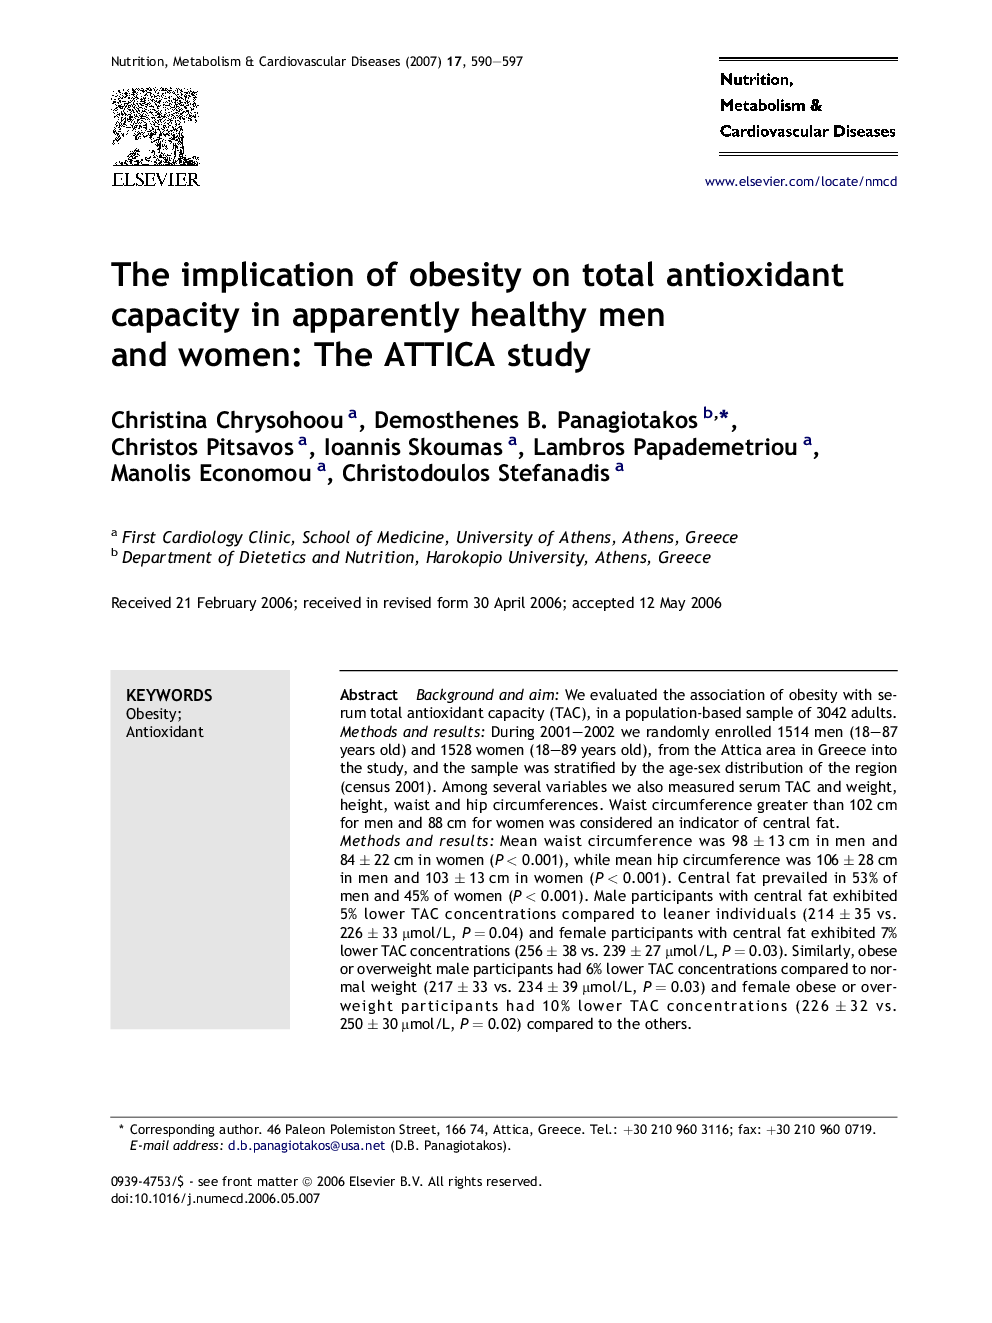 The implication of obesity on total antioxidant capacity in apparently healthy men and women: The ATTICA study